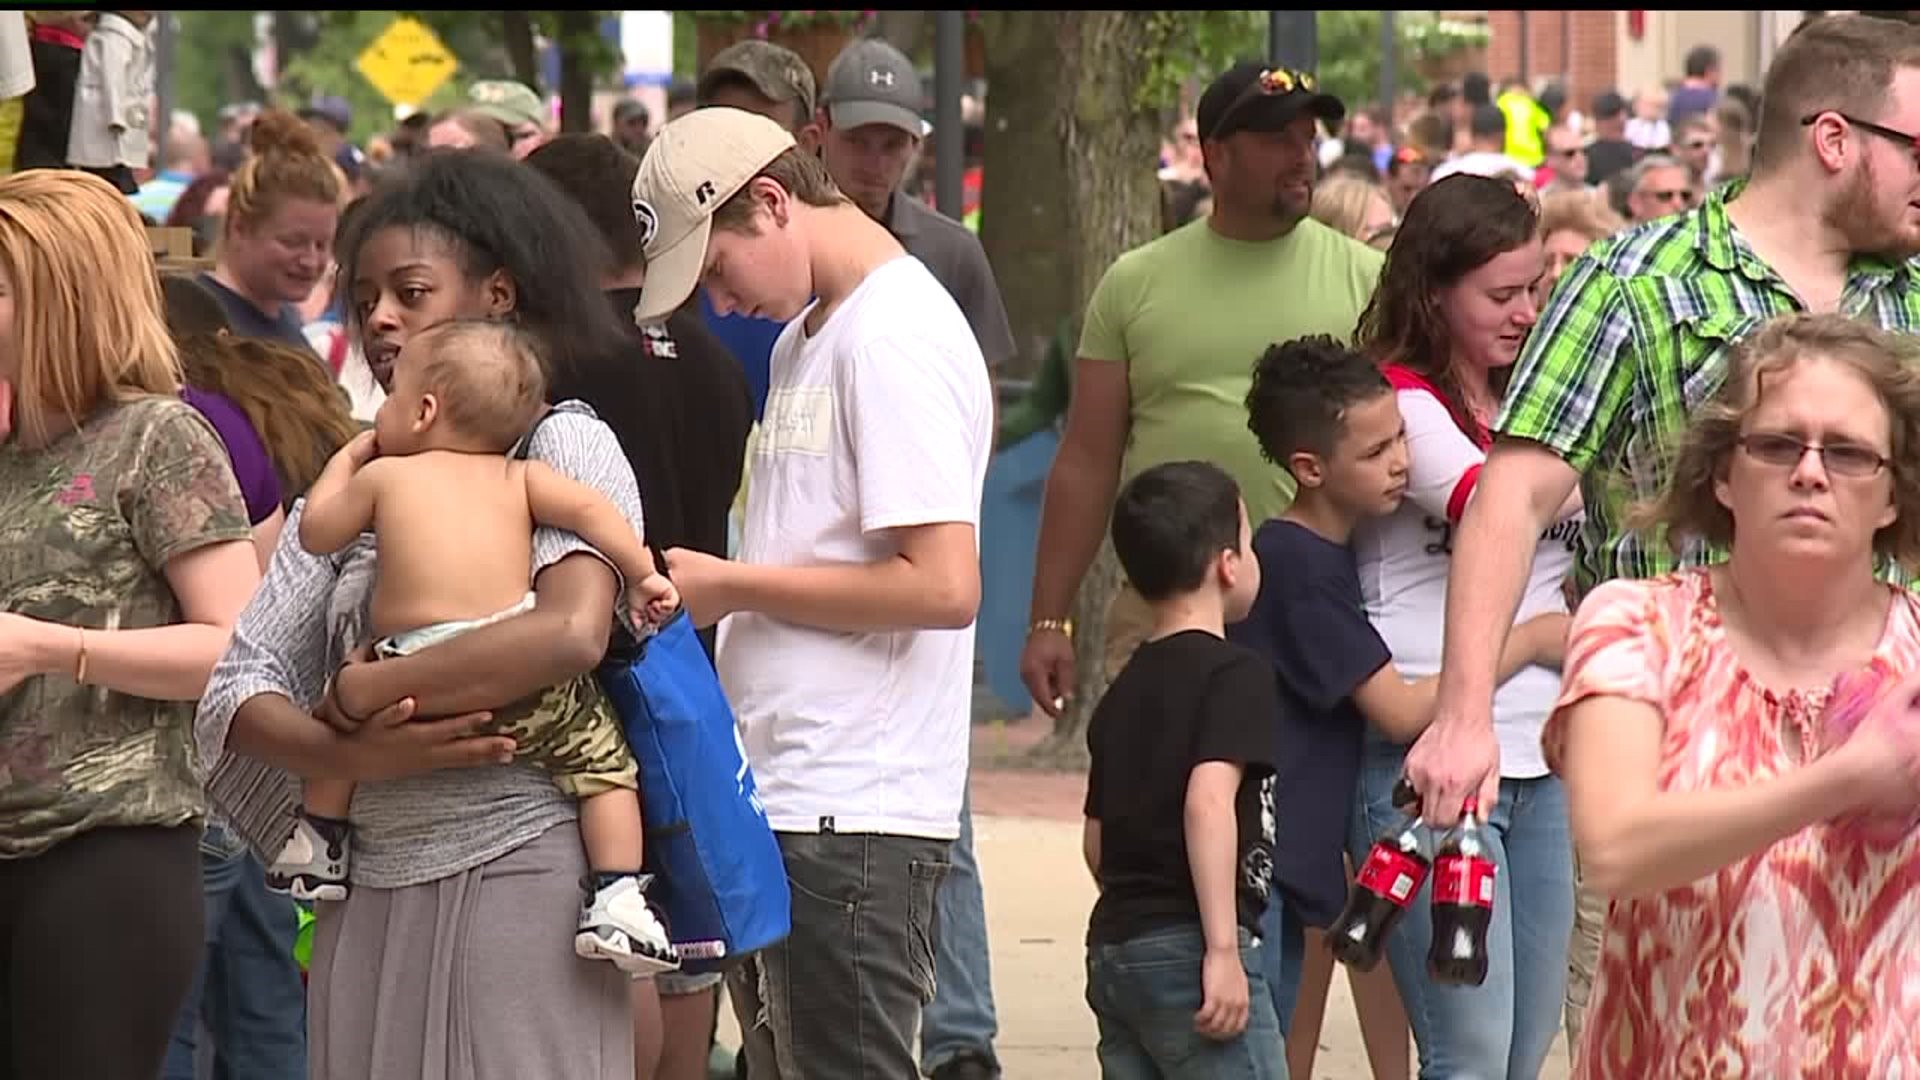 Olde York Street Fair brings thousands out to celebrate Mother’s Day